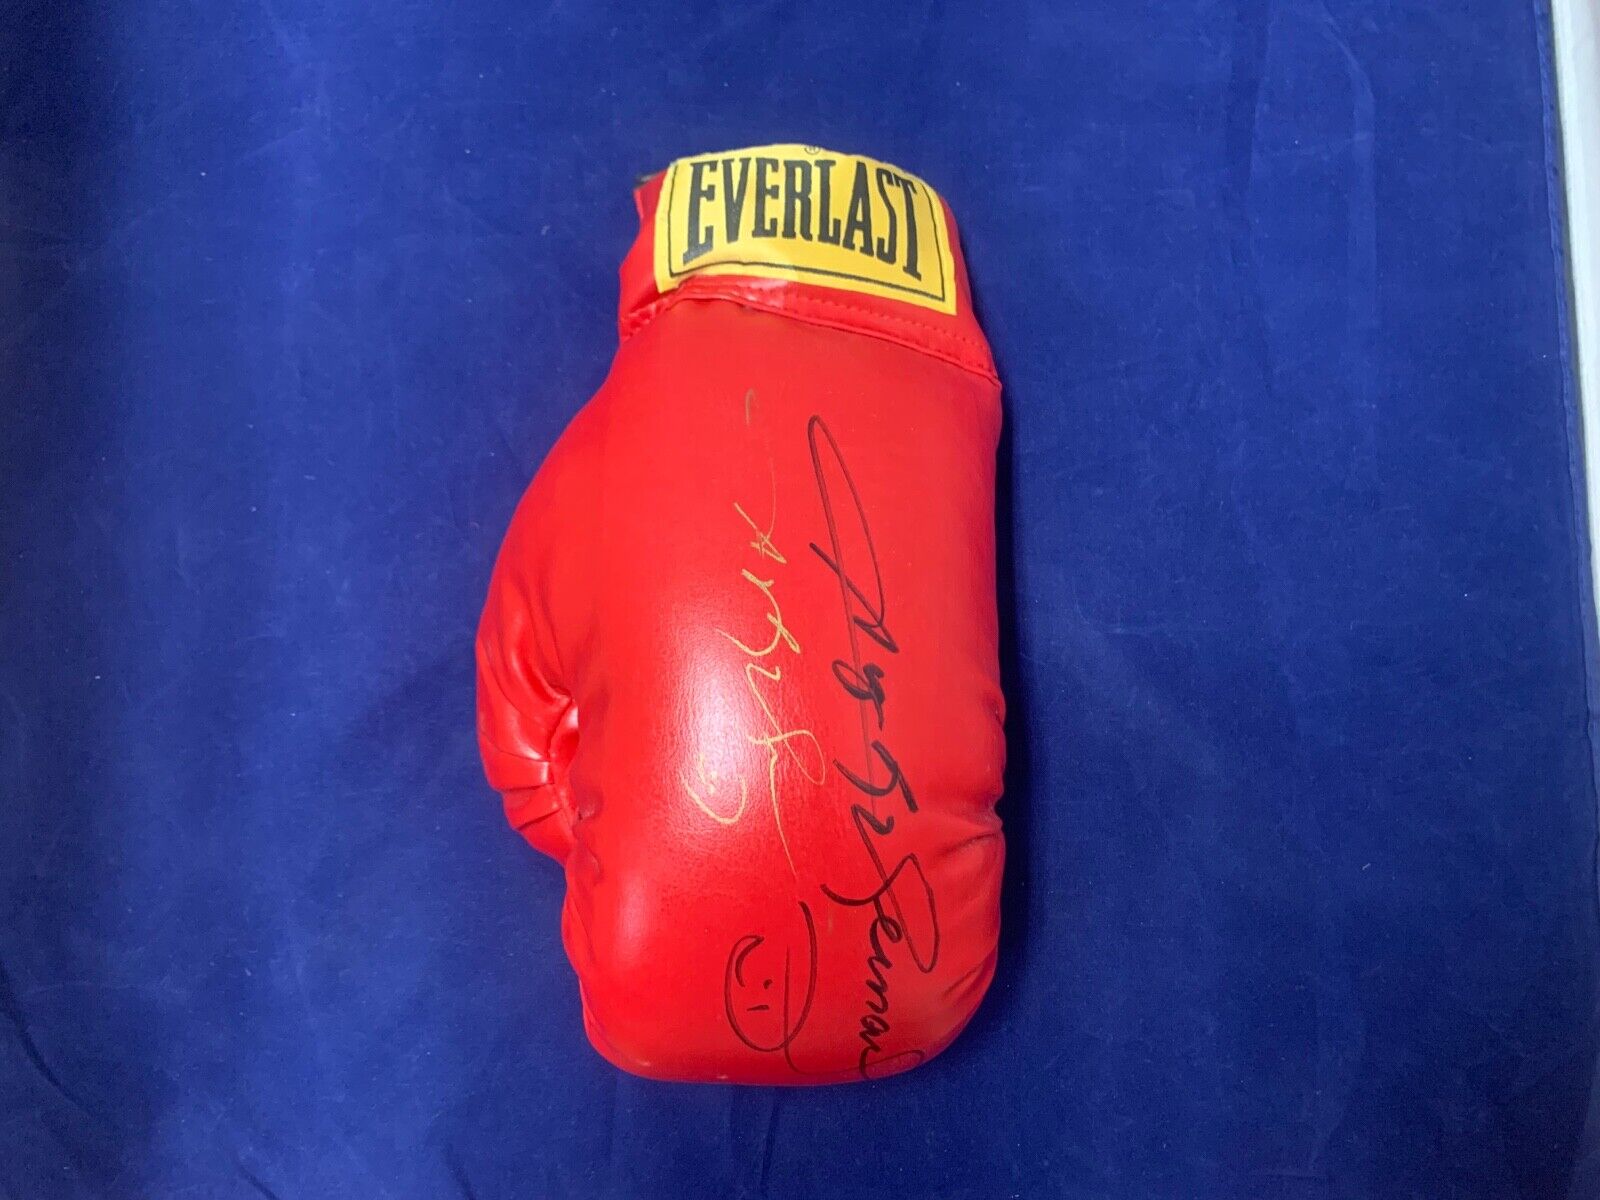 Sugar Ray Leonard Autographed Twice on Everlast Boxing Glove in Very Good Cond.